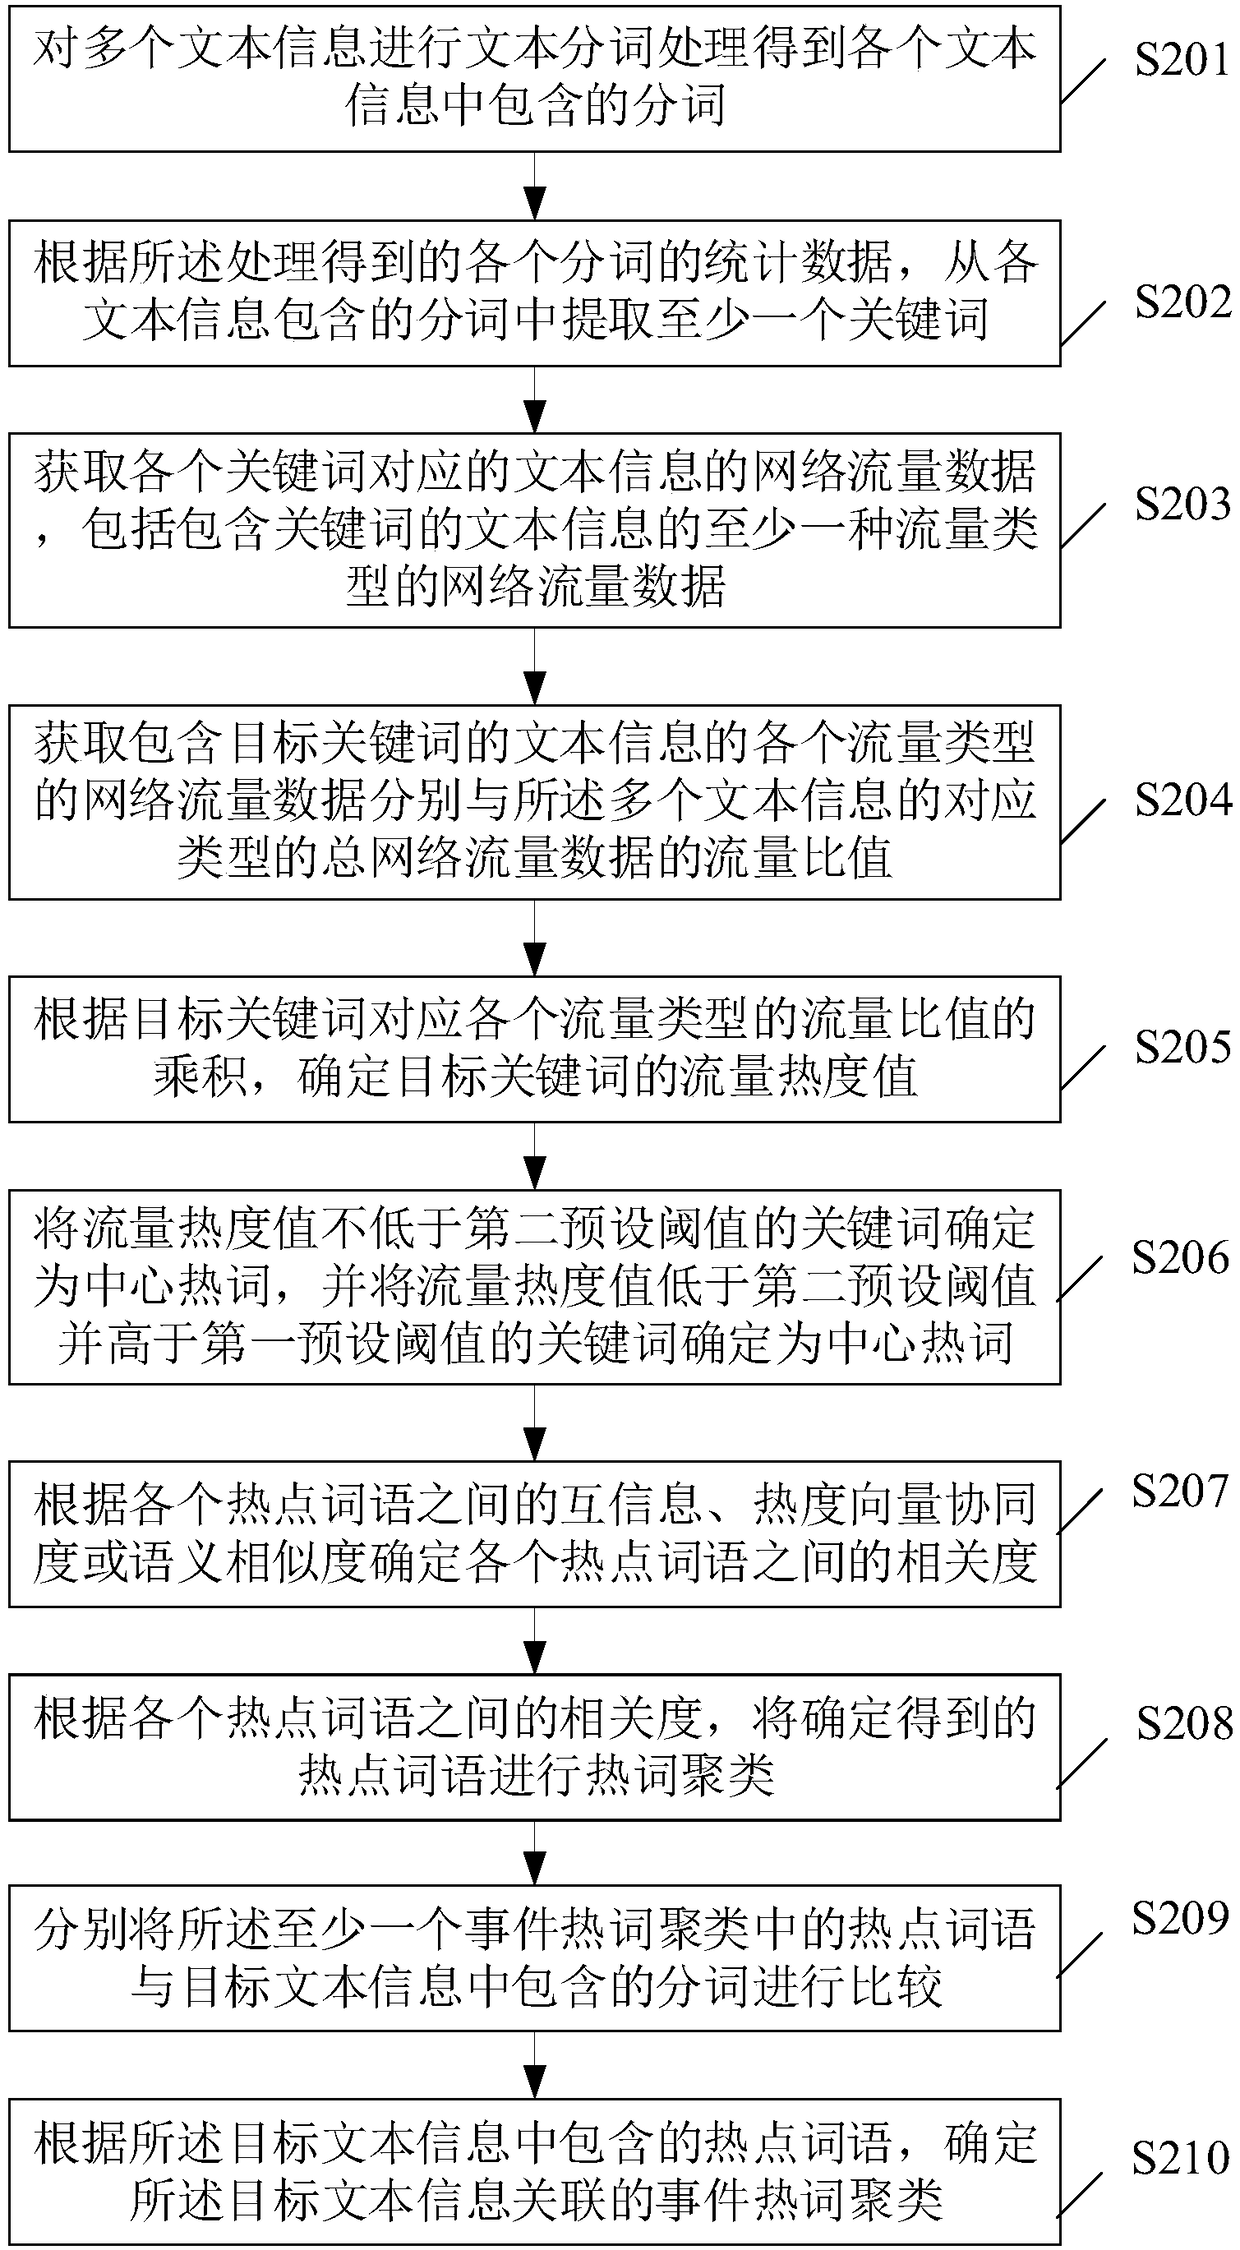 Hot-spot event information processing method and apparatus